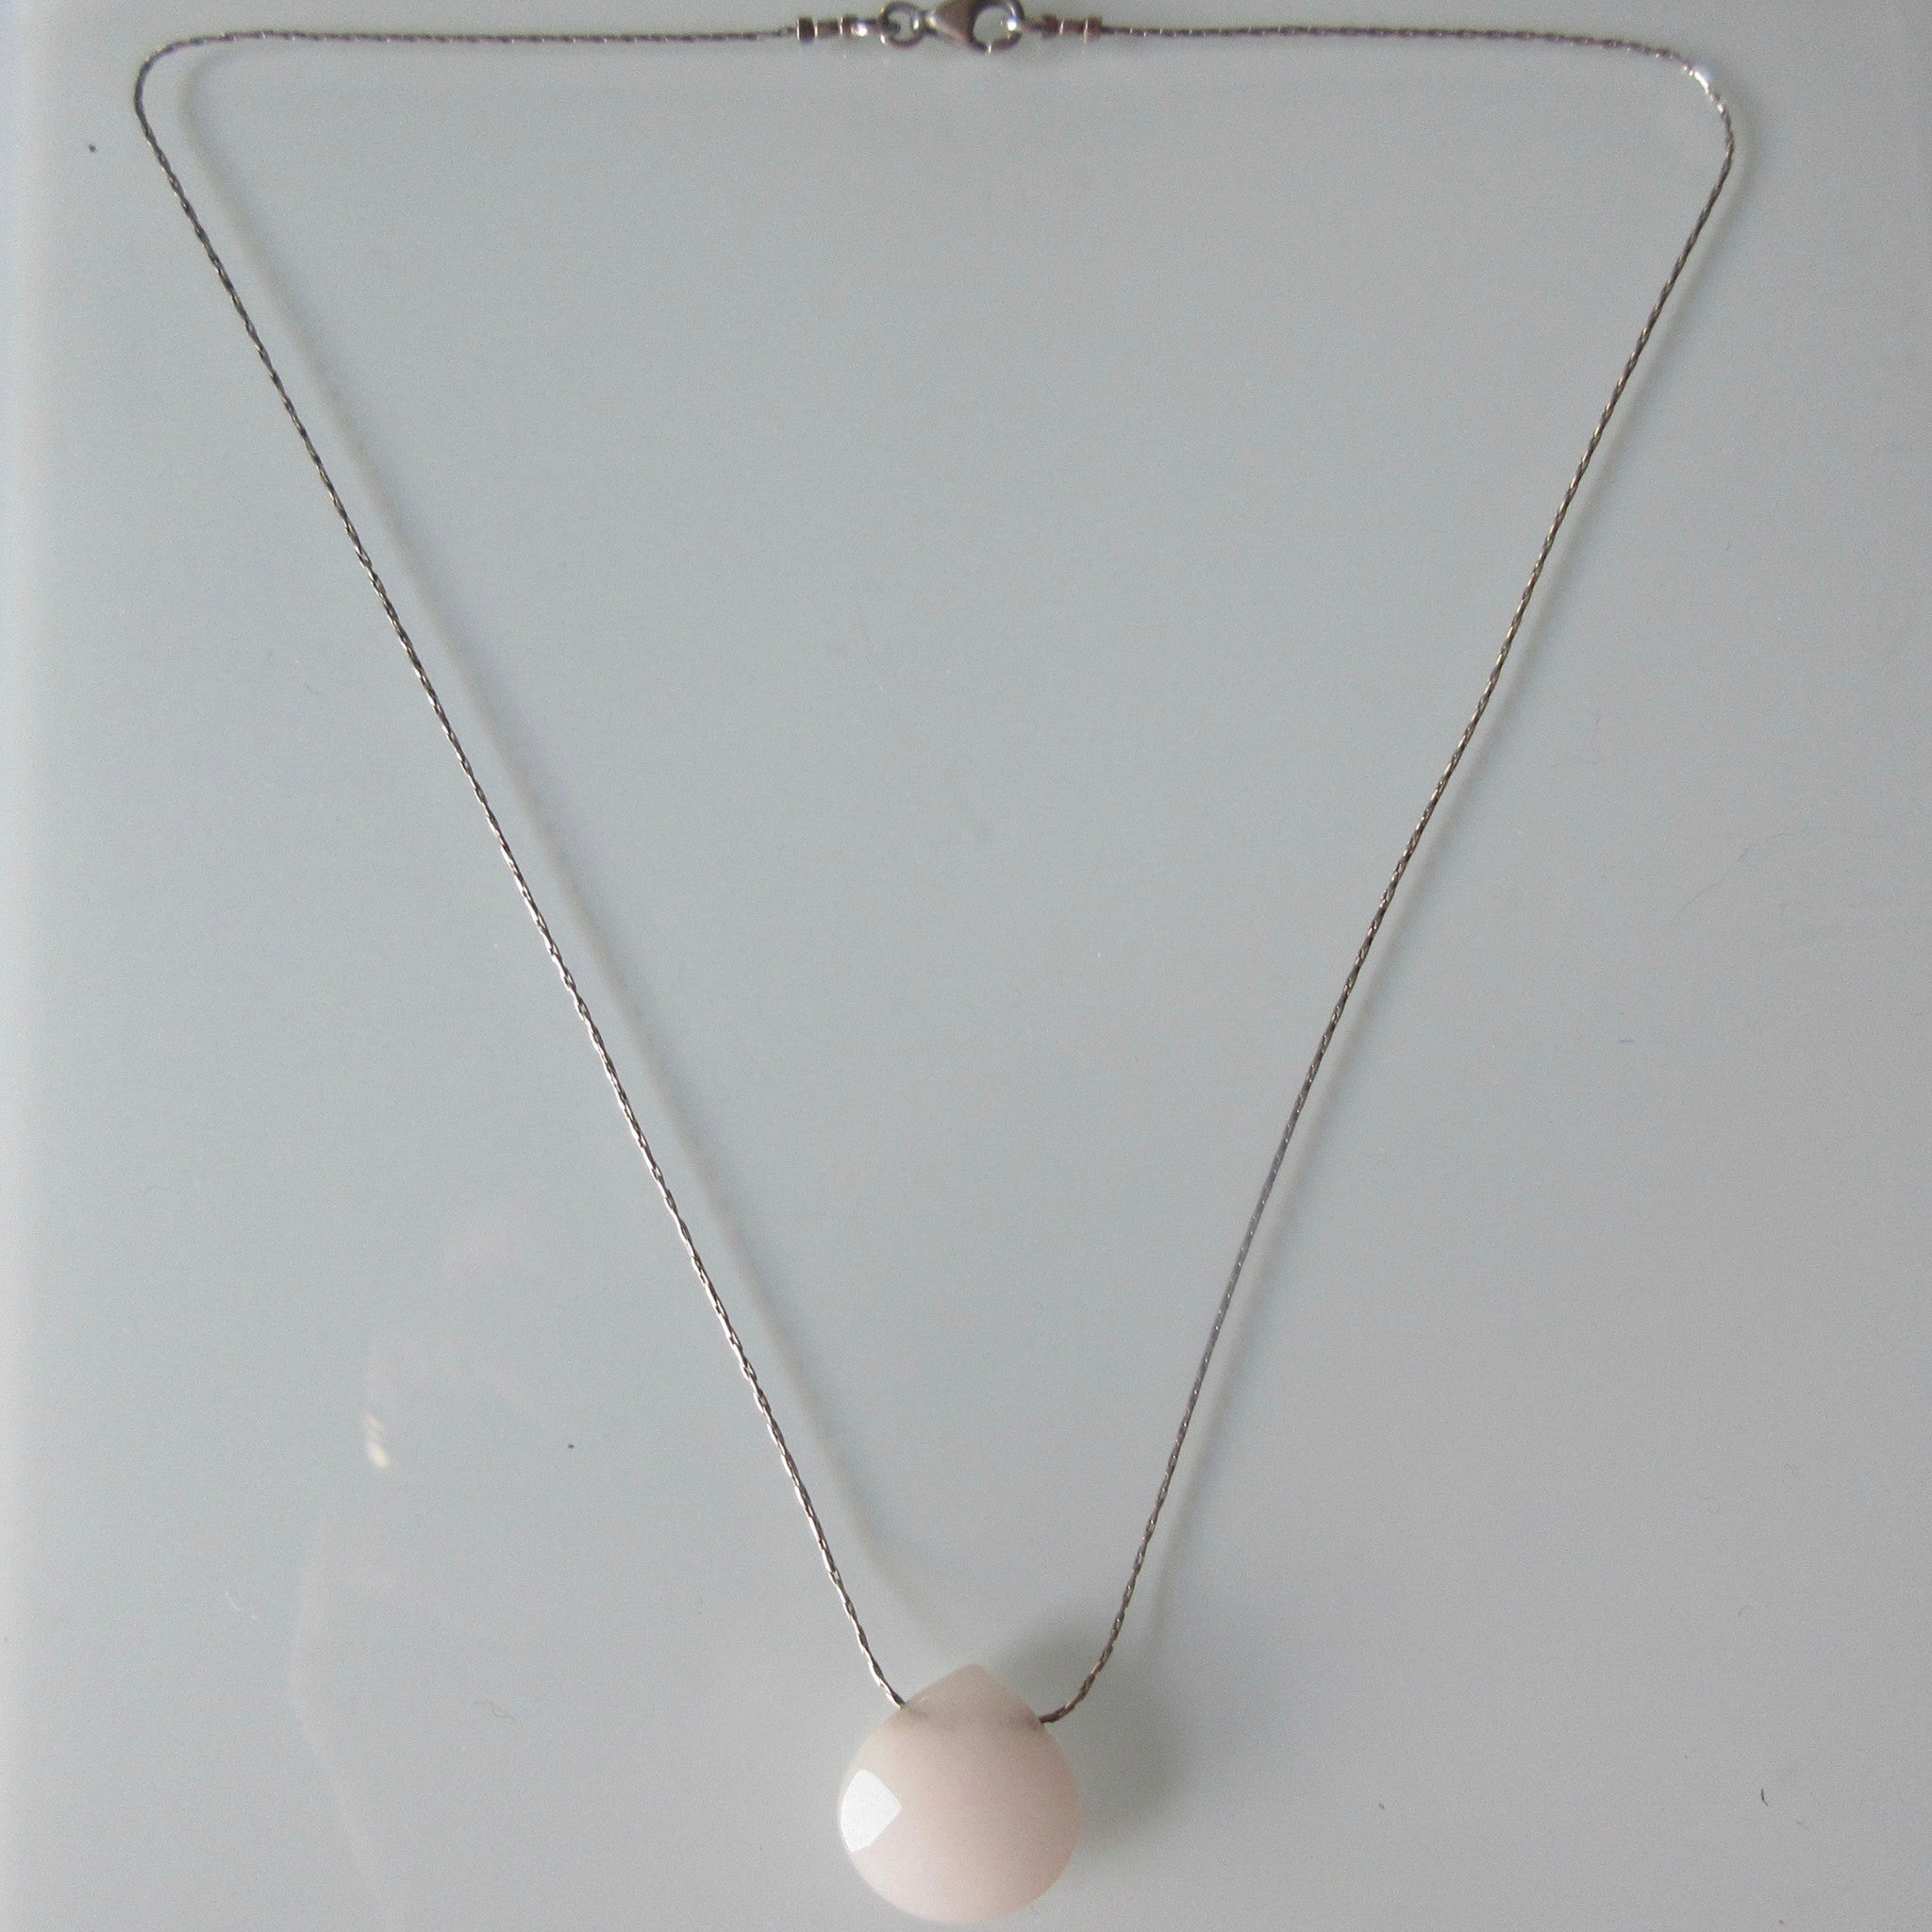 Pink Cut Crystal Tear Drop Pendant on Sterling Silver Chain